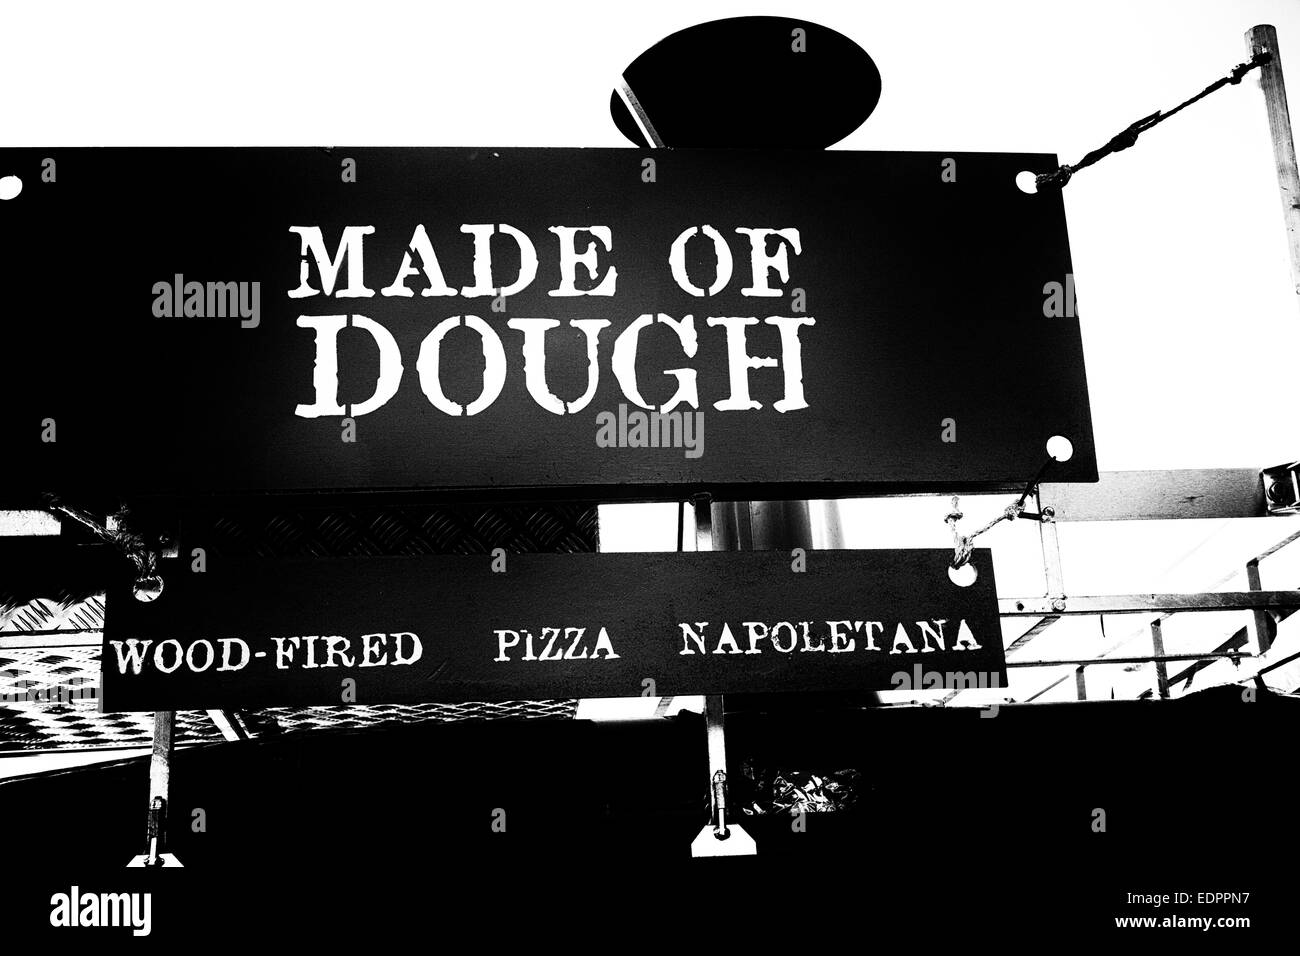 Made of Dough sign at a market stall Stock Photo